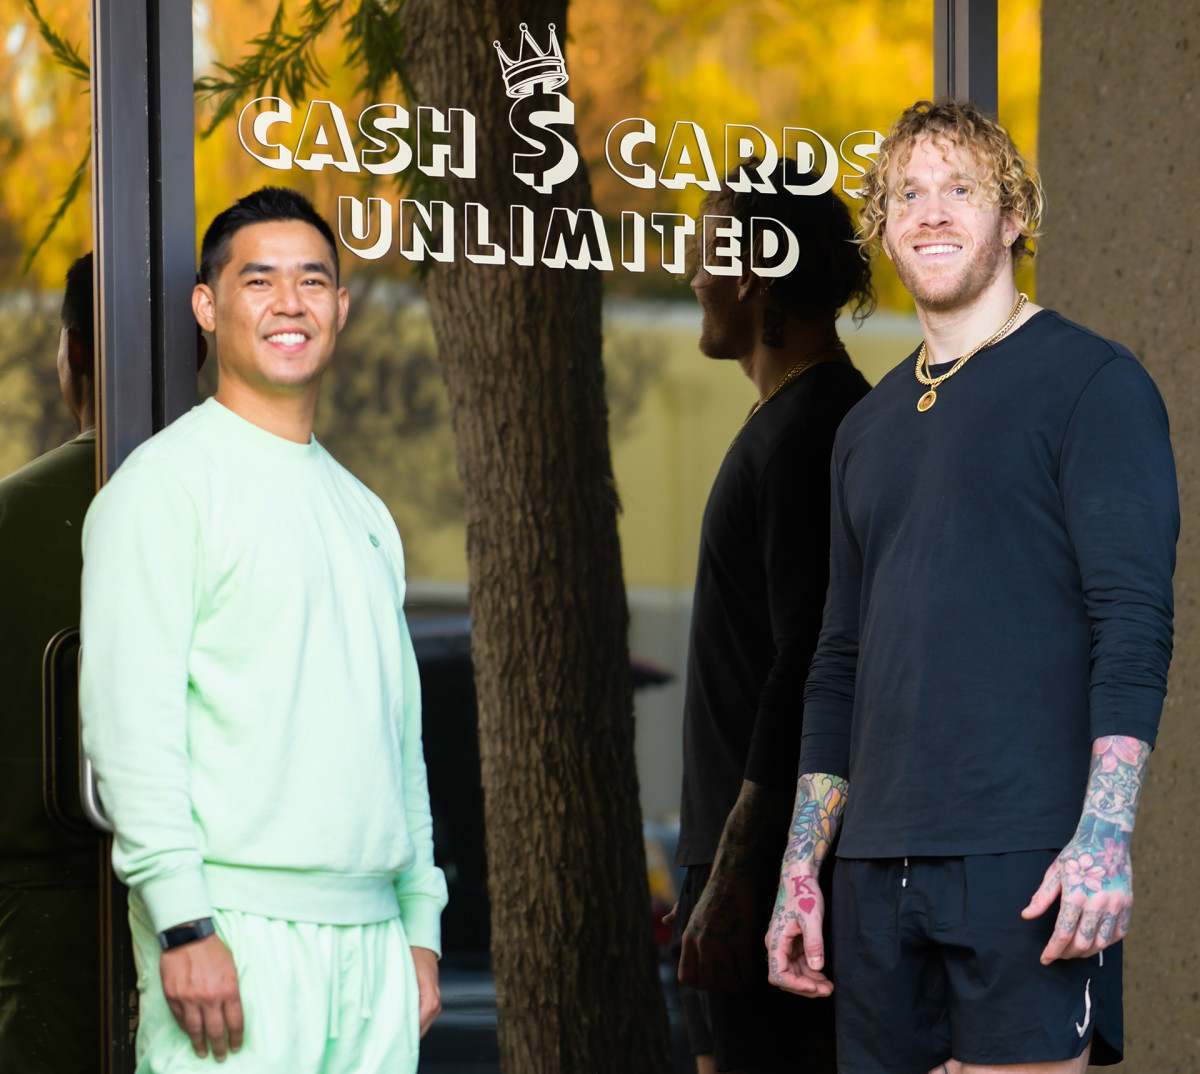 Cassius Marsh and business manager Nick Nugwynne outside their new store selling collectible cards in Westlake Village, California